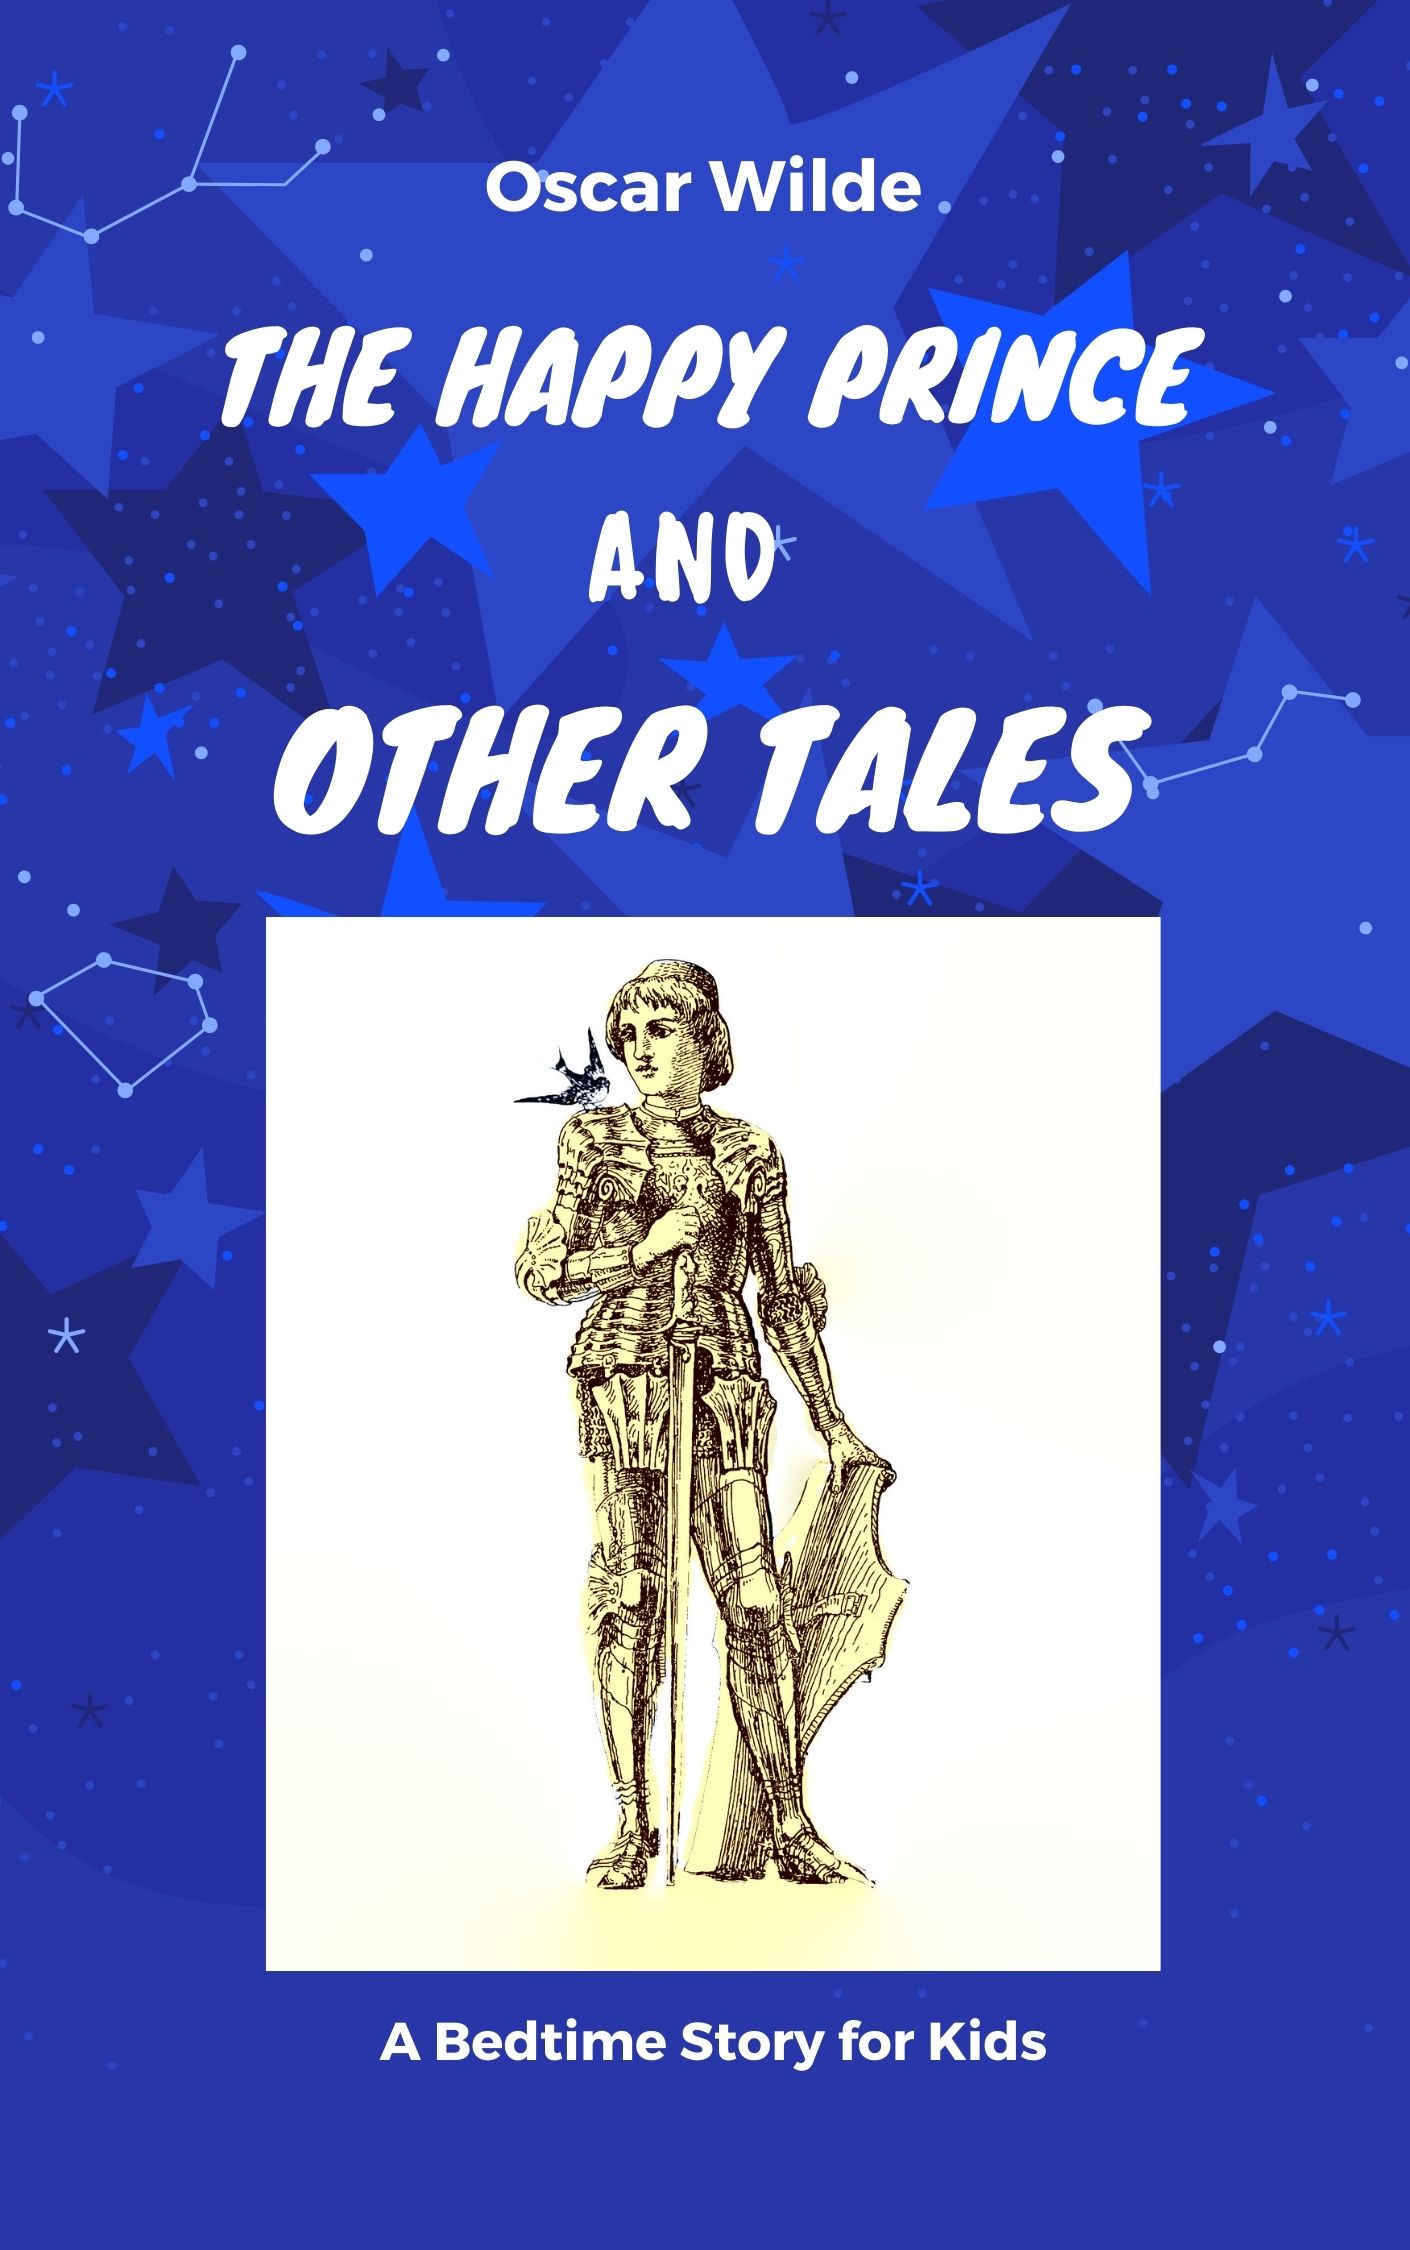 FREE: The Happy Prince and Other Stories by OSCAR WILDE